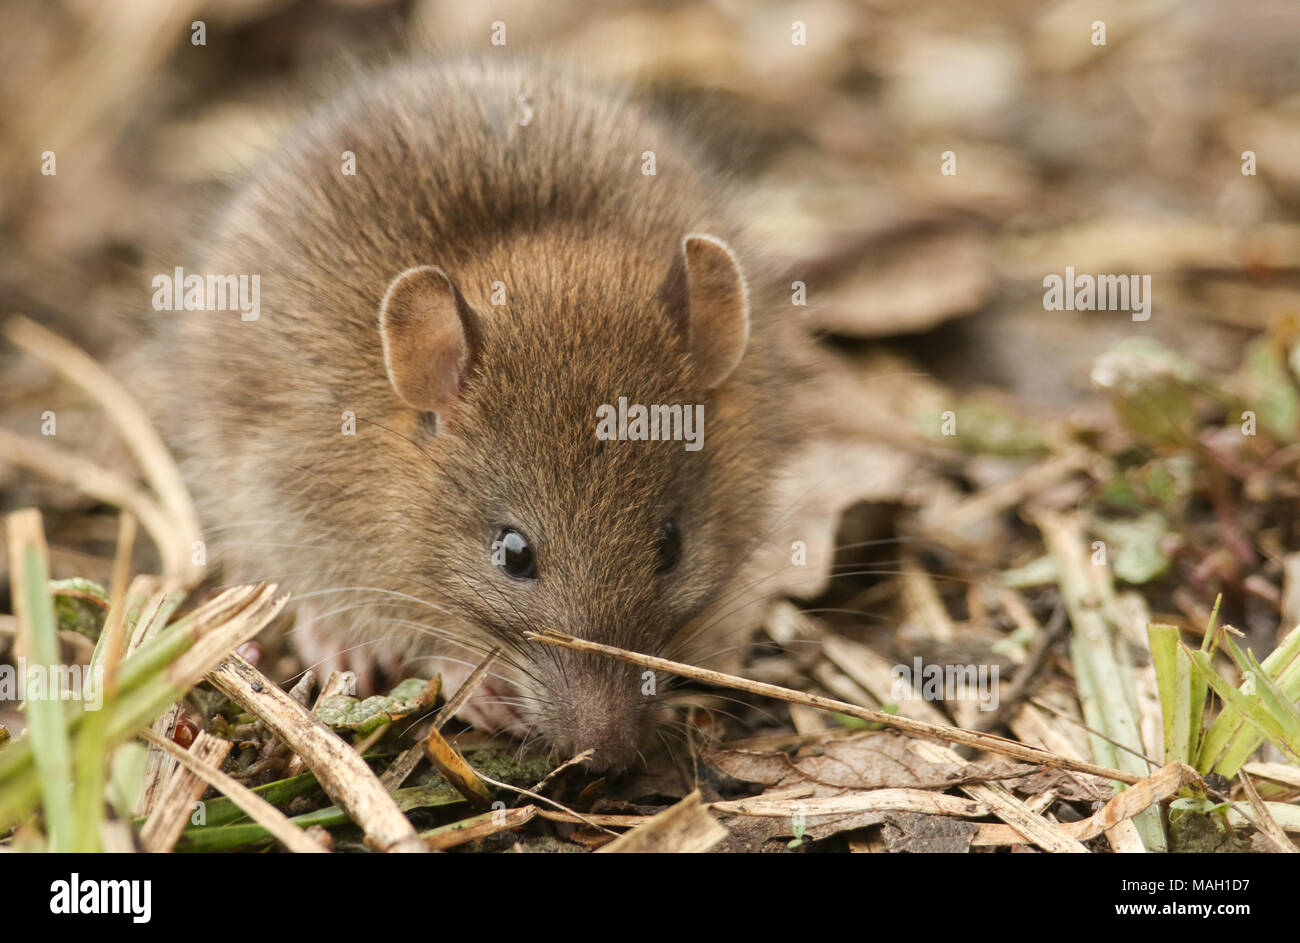 A cute baby wild Brown Rat (Rattus norvegicus) searching for food in the undergrowth. Stock Photo